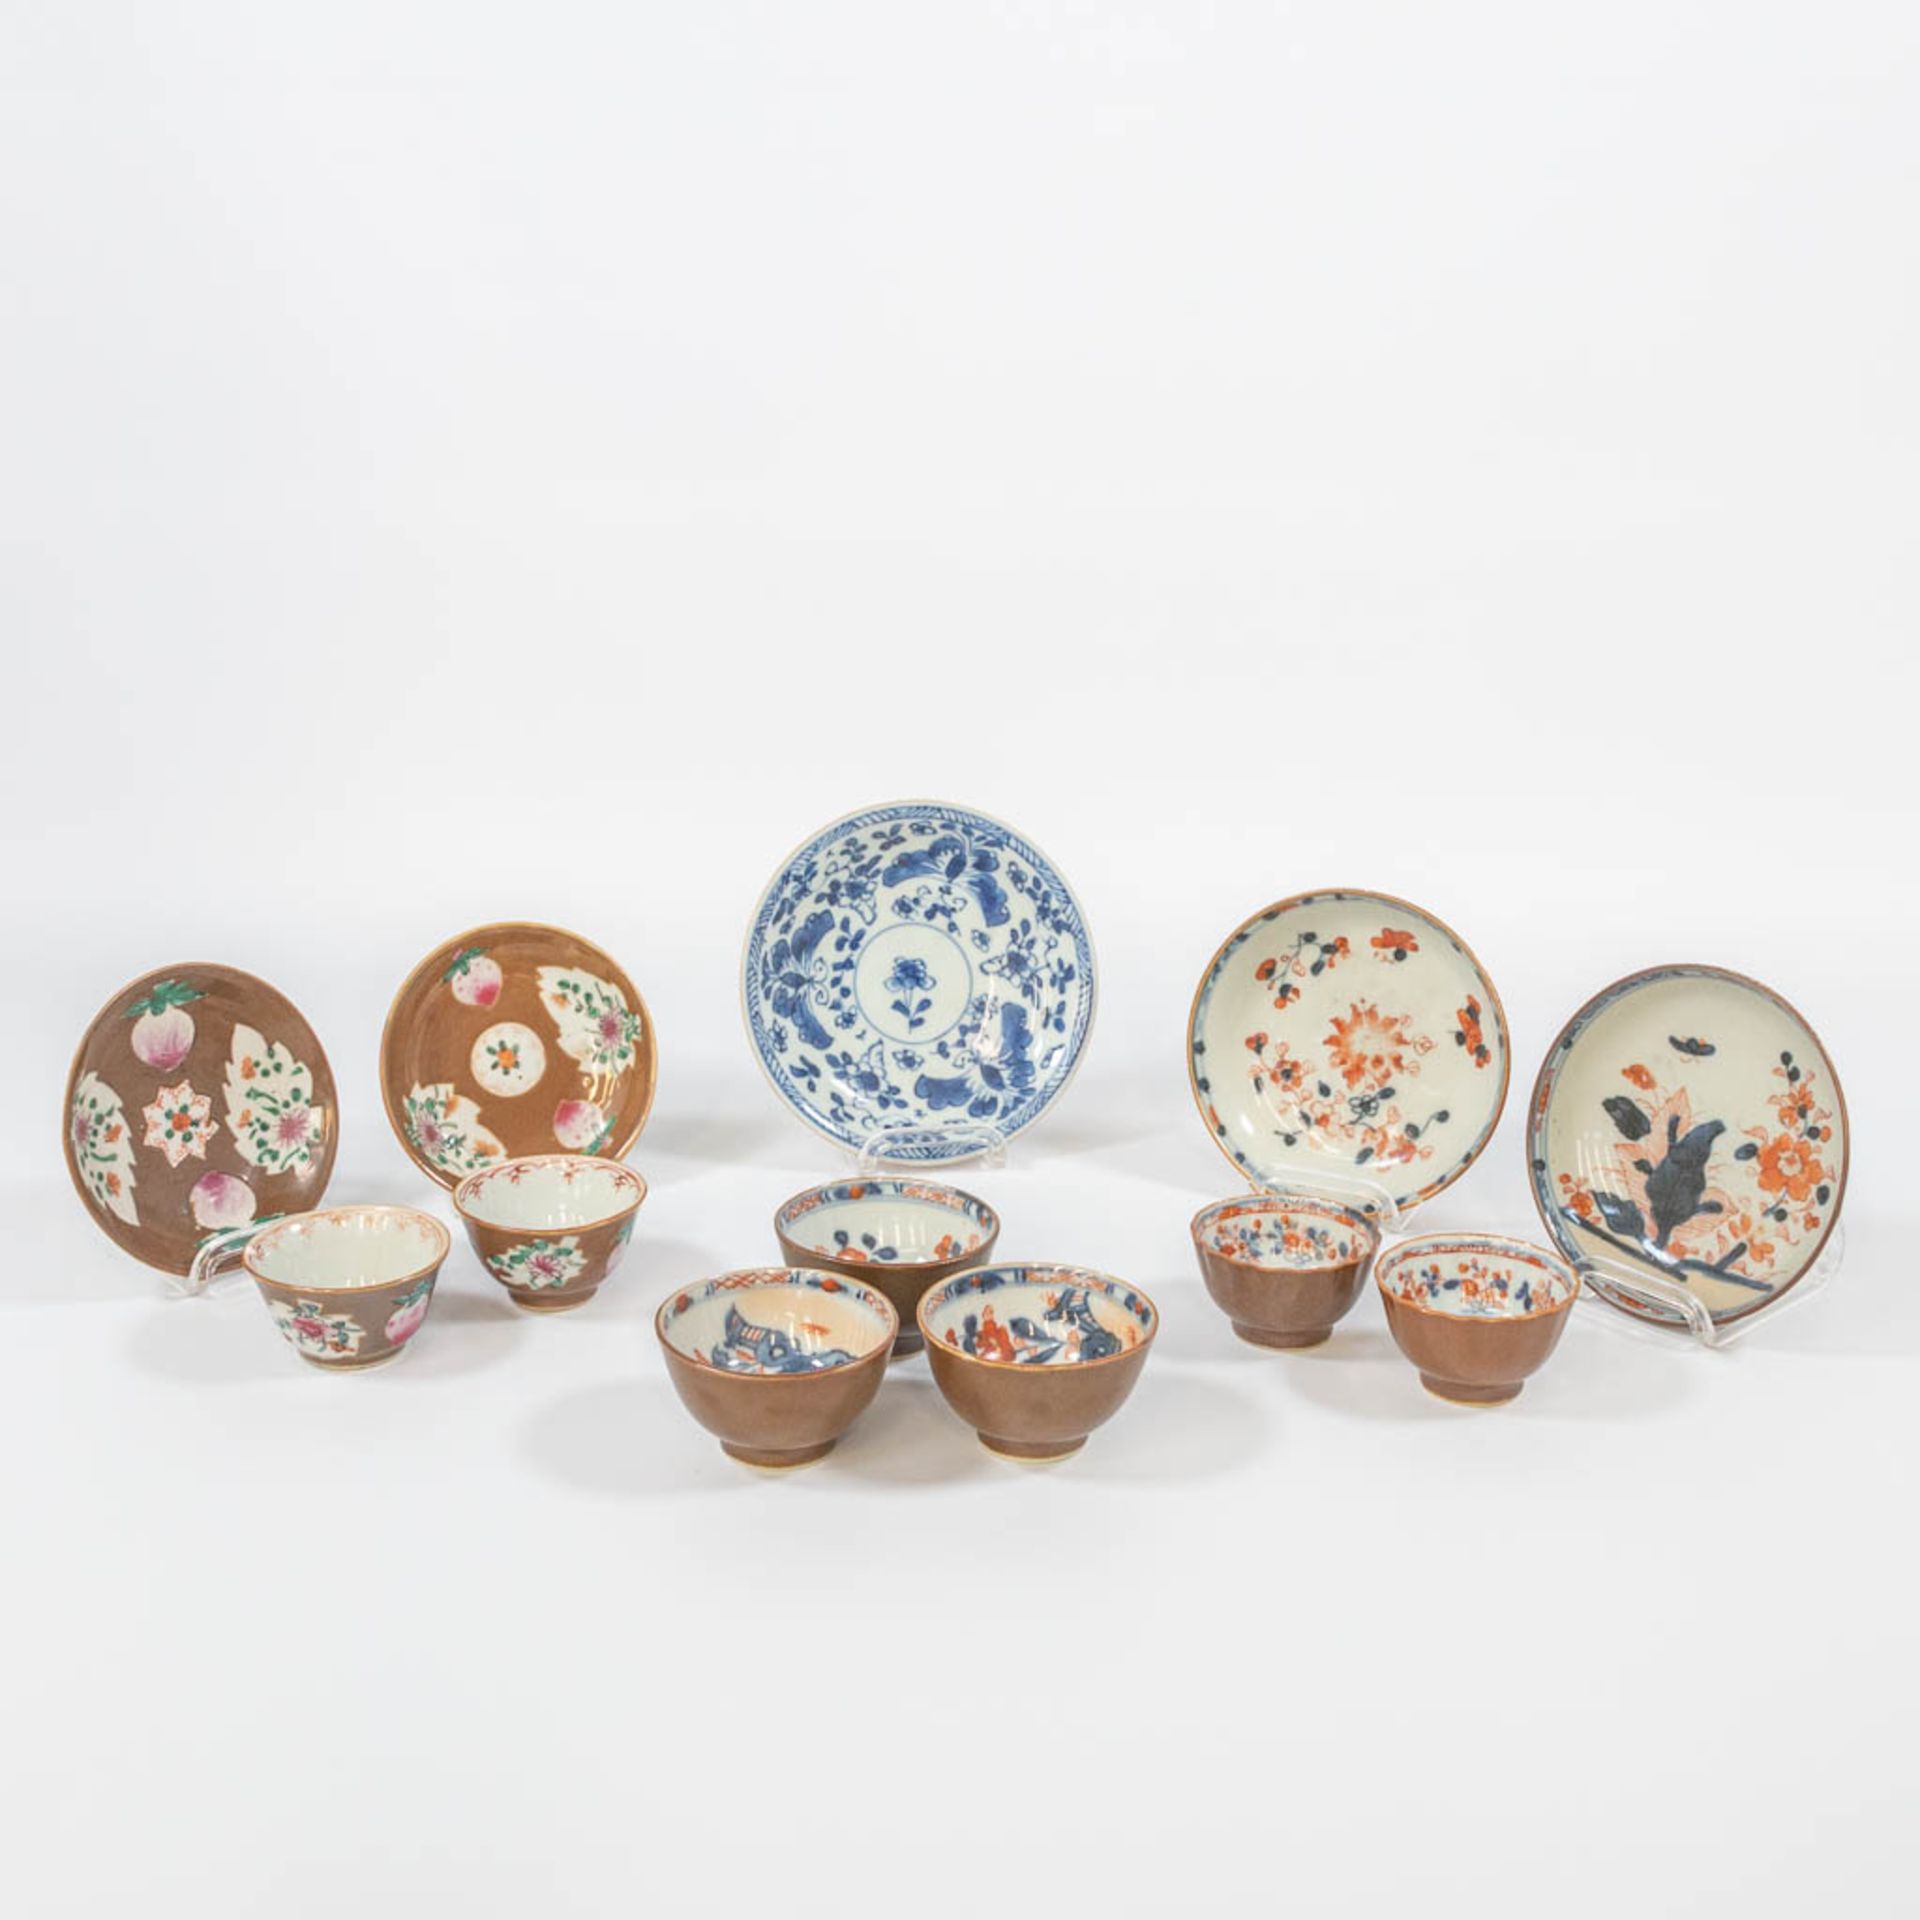 A collection of 12 Capucine Chinese porcelain items, consisting of 5 plates and 7 cups.